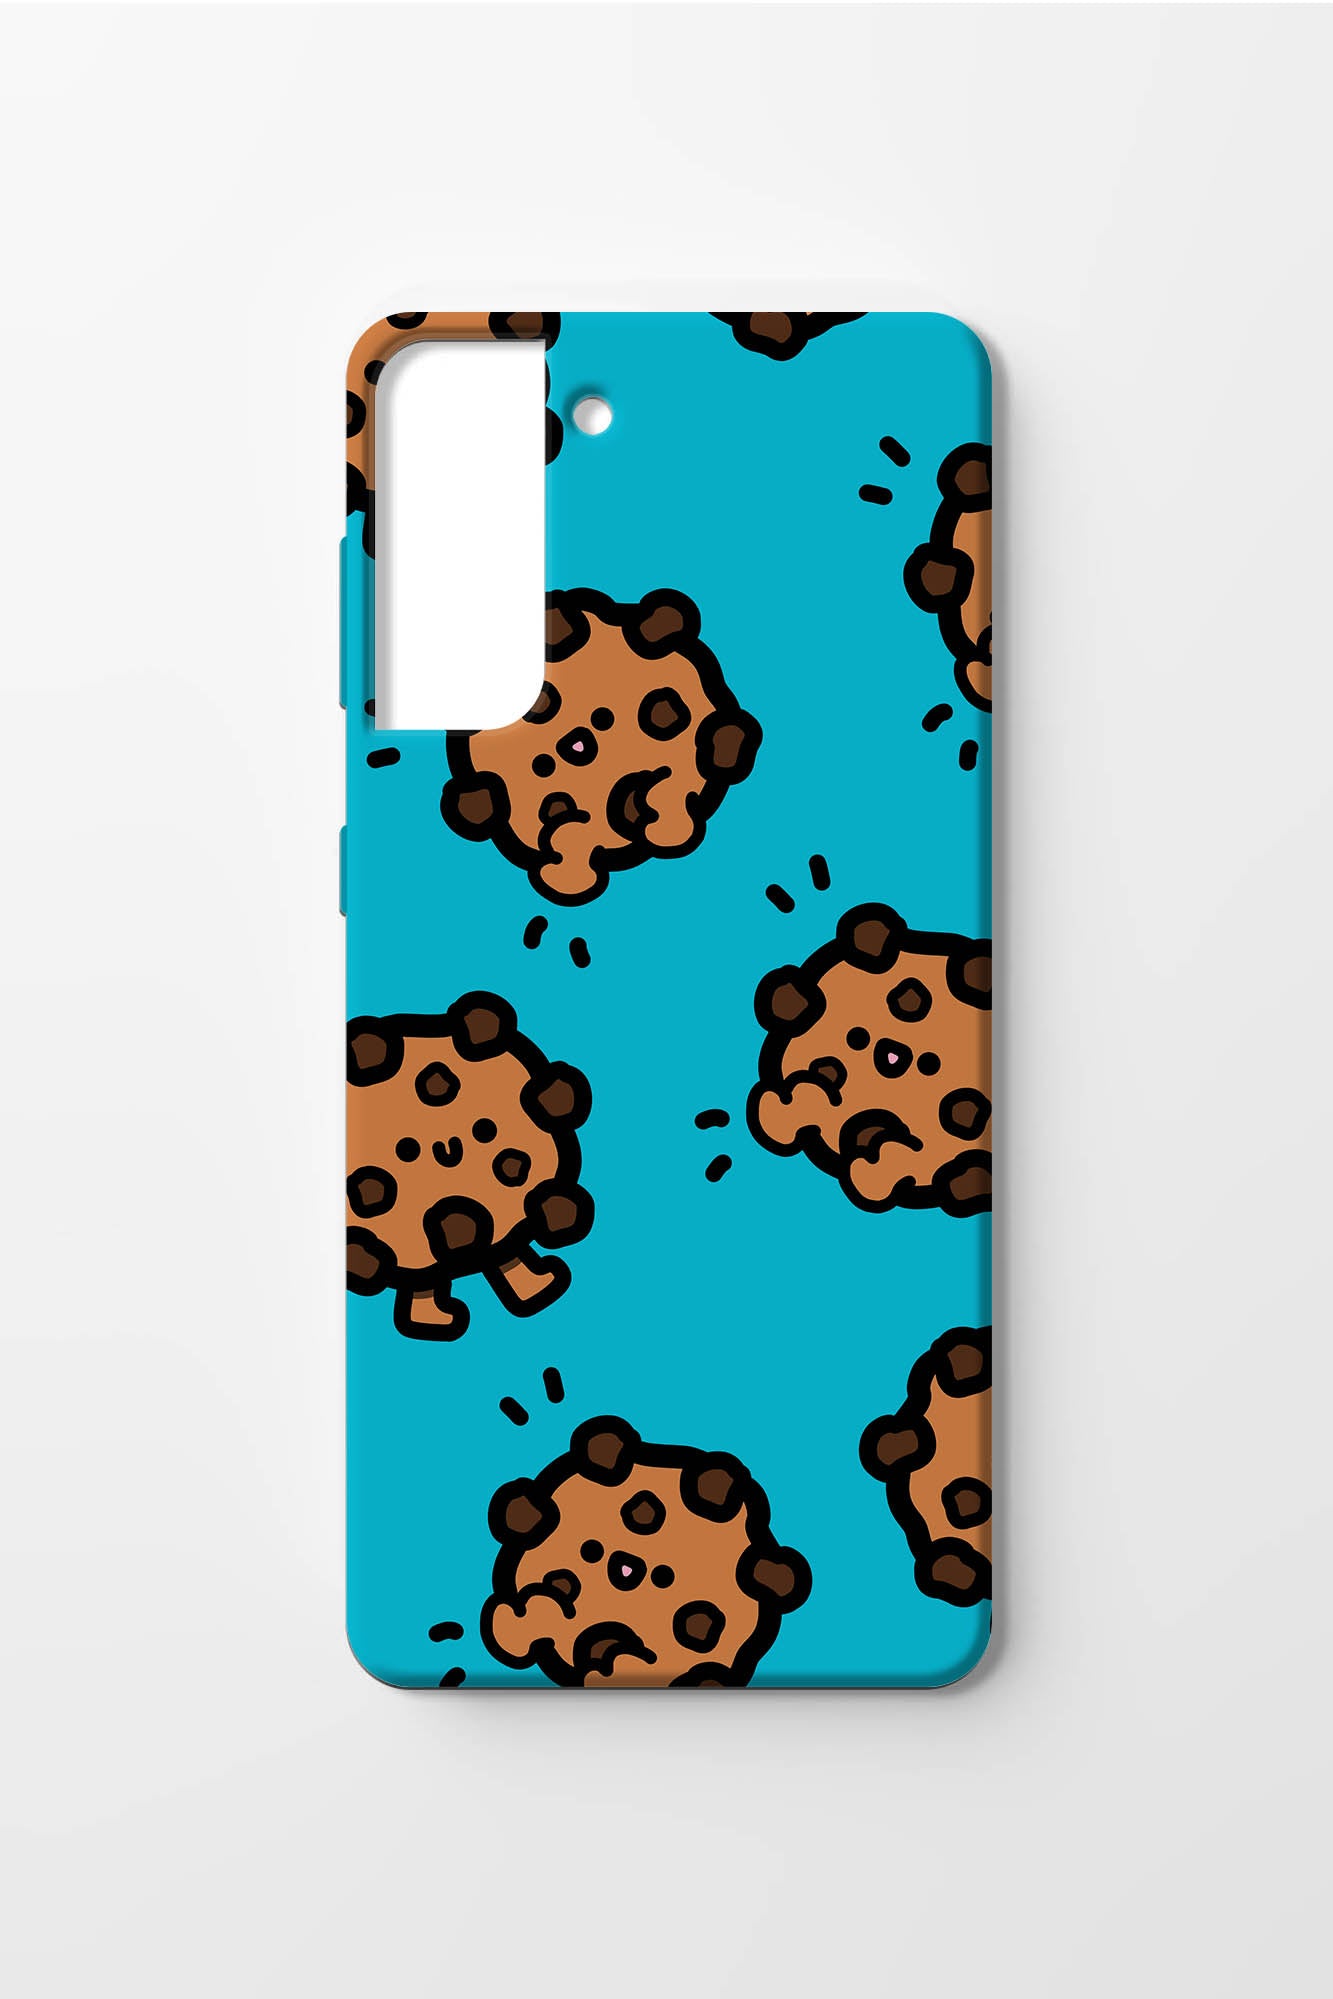 YUMIKIE Android Case